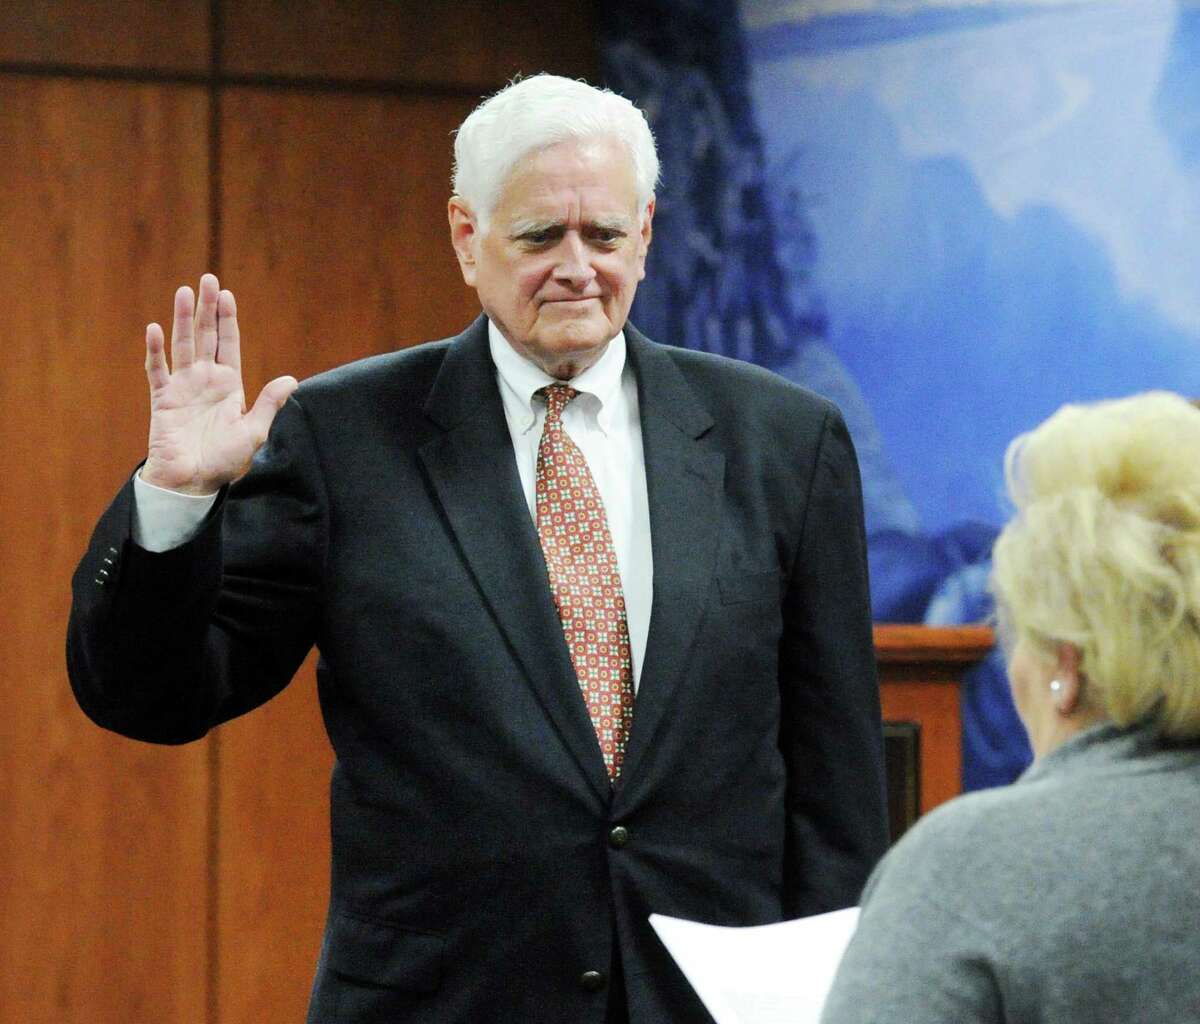 John Toner, seen here being sworn in for his second term in 2017, will not seek re-election to the town’s Board of Selectmen.